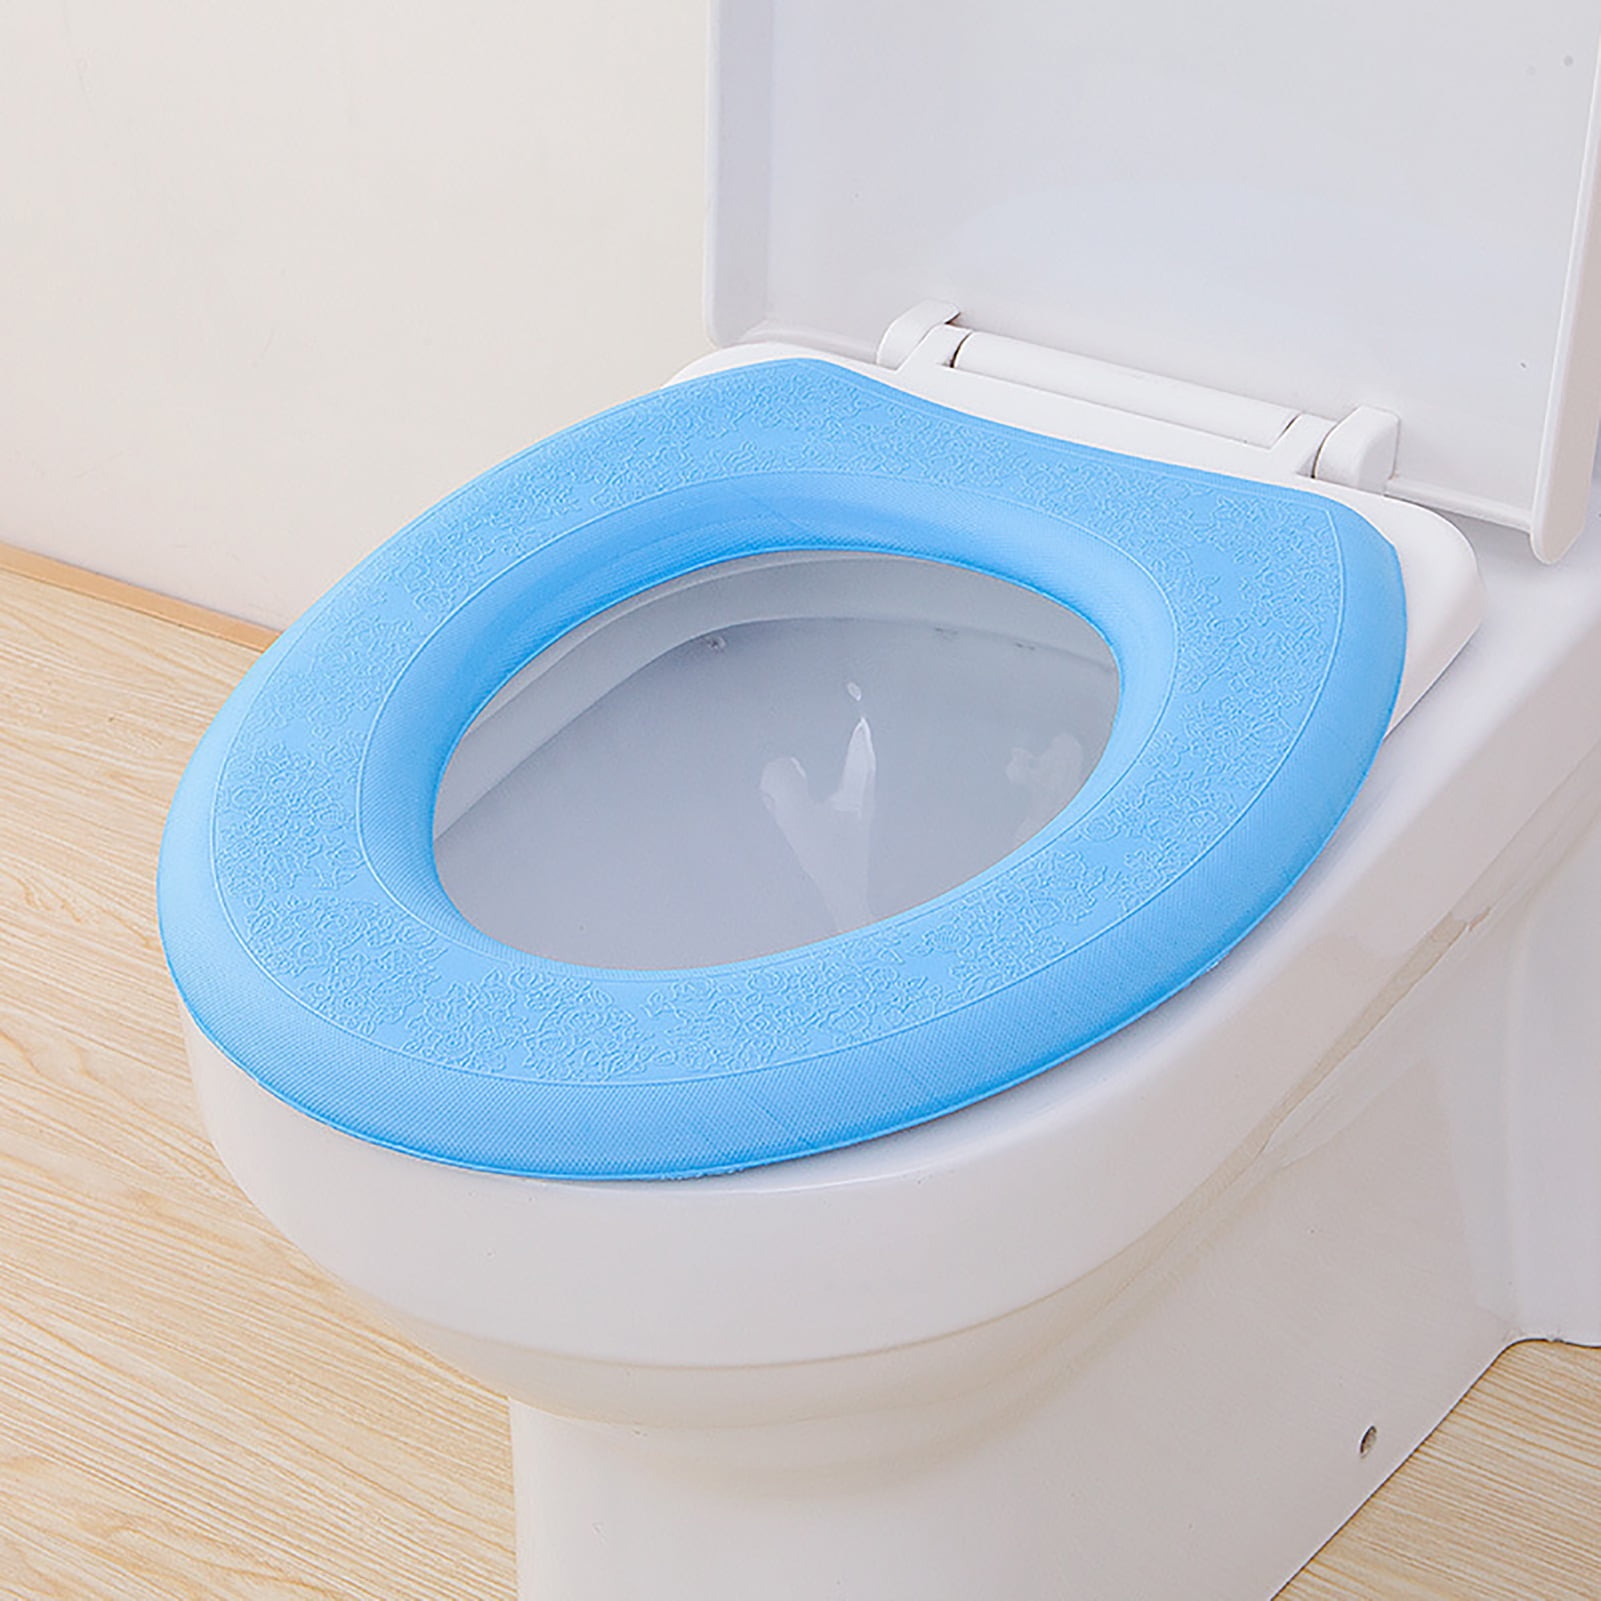 Details about   Toilet Seat Cover Mat Bathroom Winter Closestool Cushions Washable Soft Warmer 